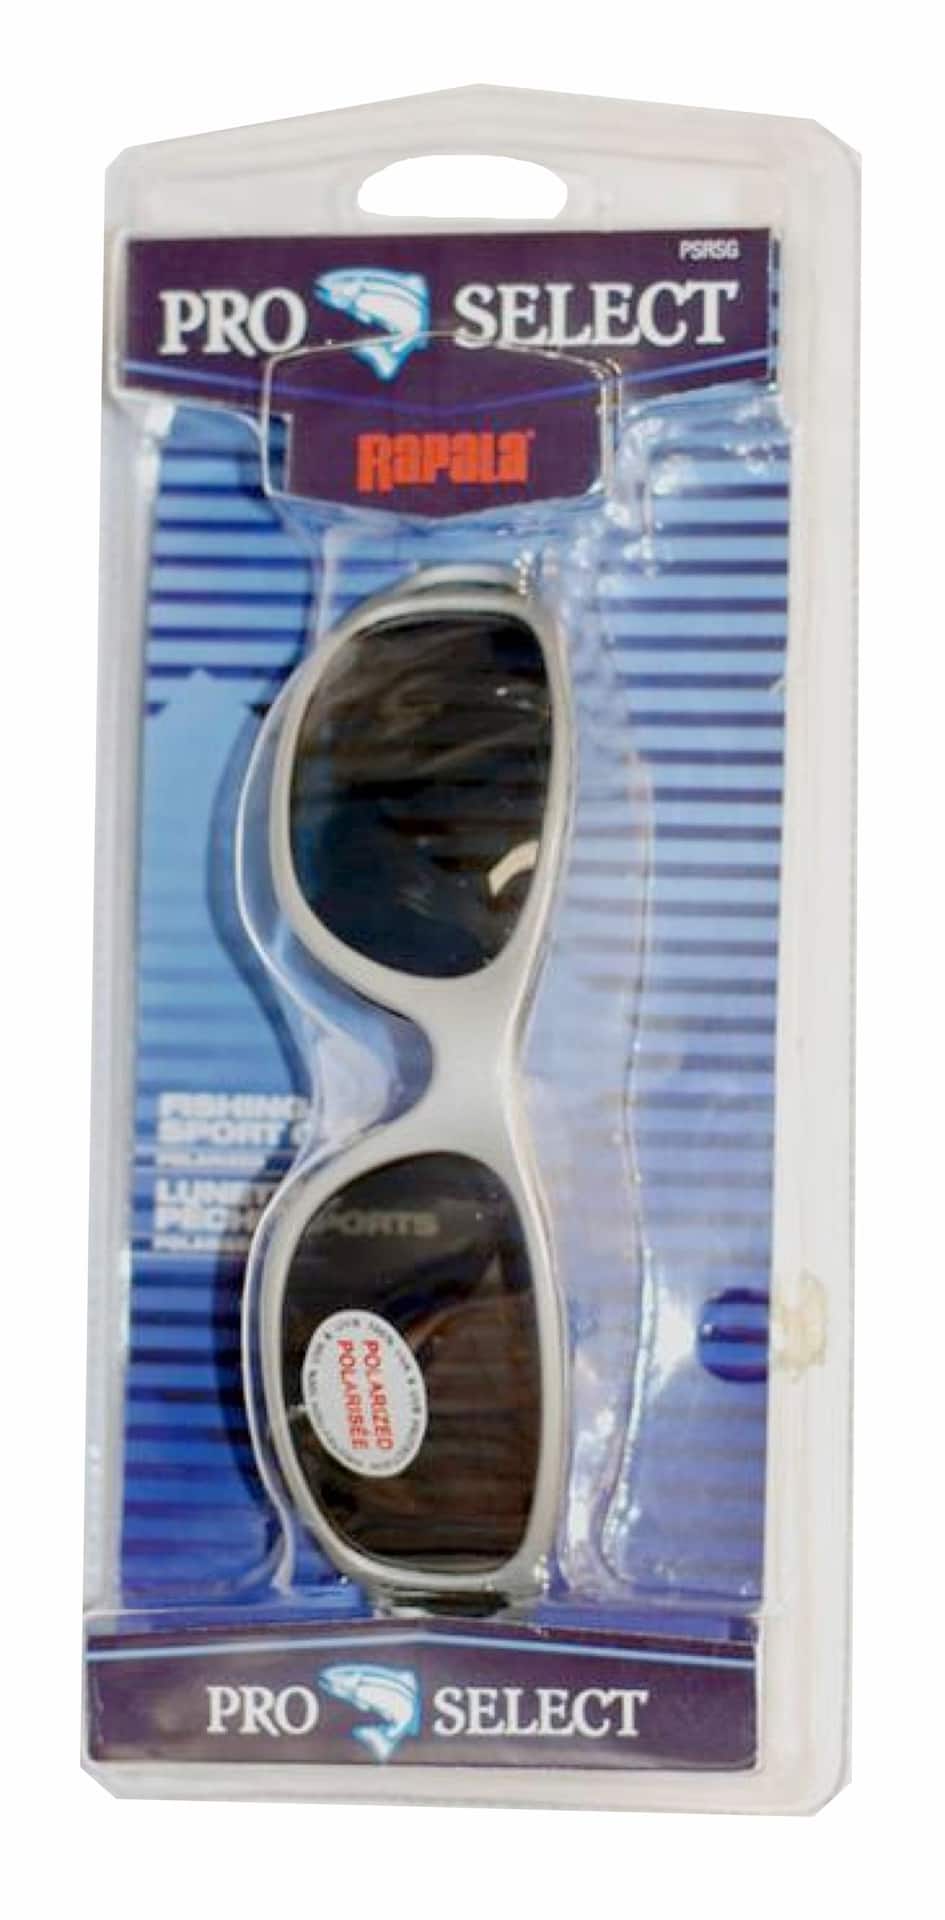 https://media-www.canadiantire.ca/product/playing/fishing/fishing-accessories/0771082/rapala-pro-select-polarized-sunglasses-8fe711c6-d1ab-4970-b2aa-8715abd56eb3-jpgrendition.jpg